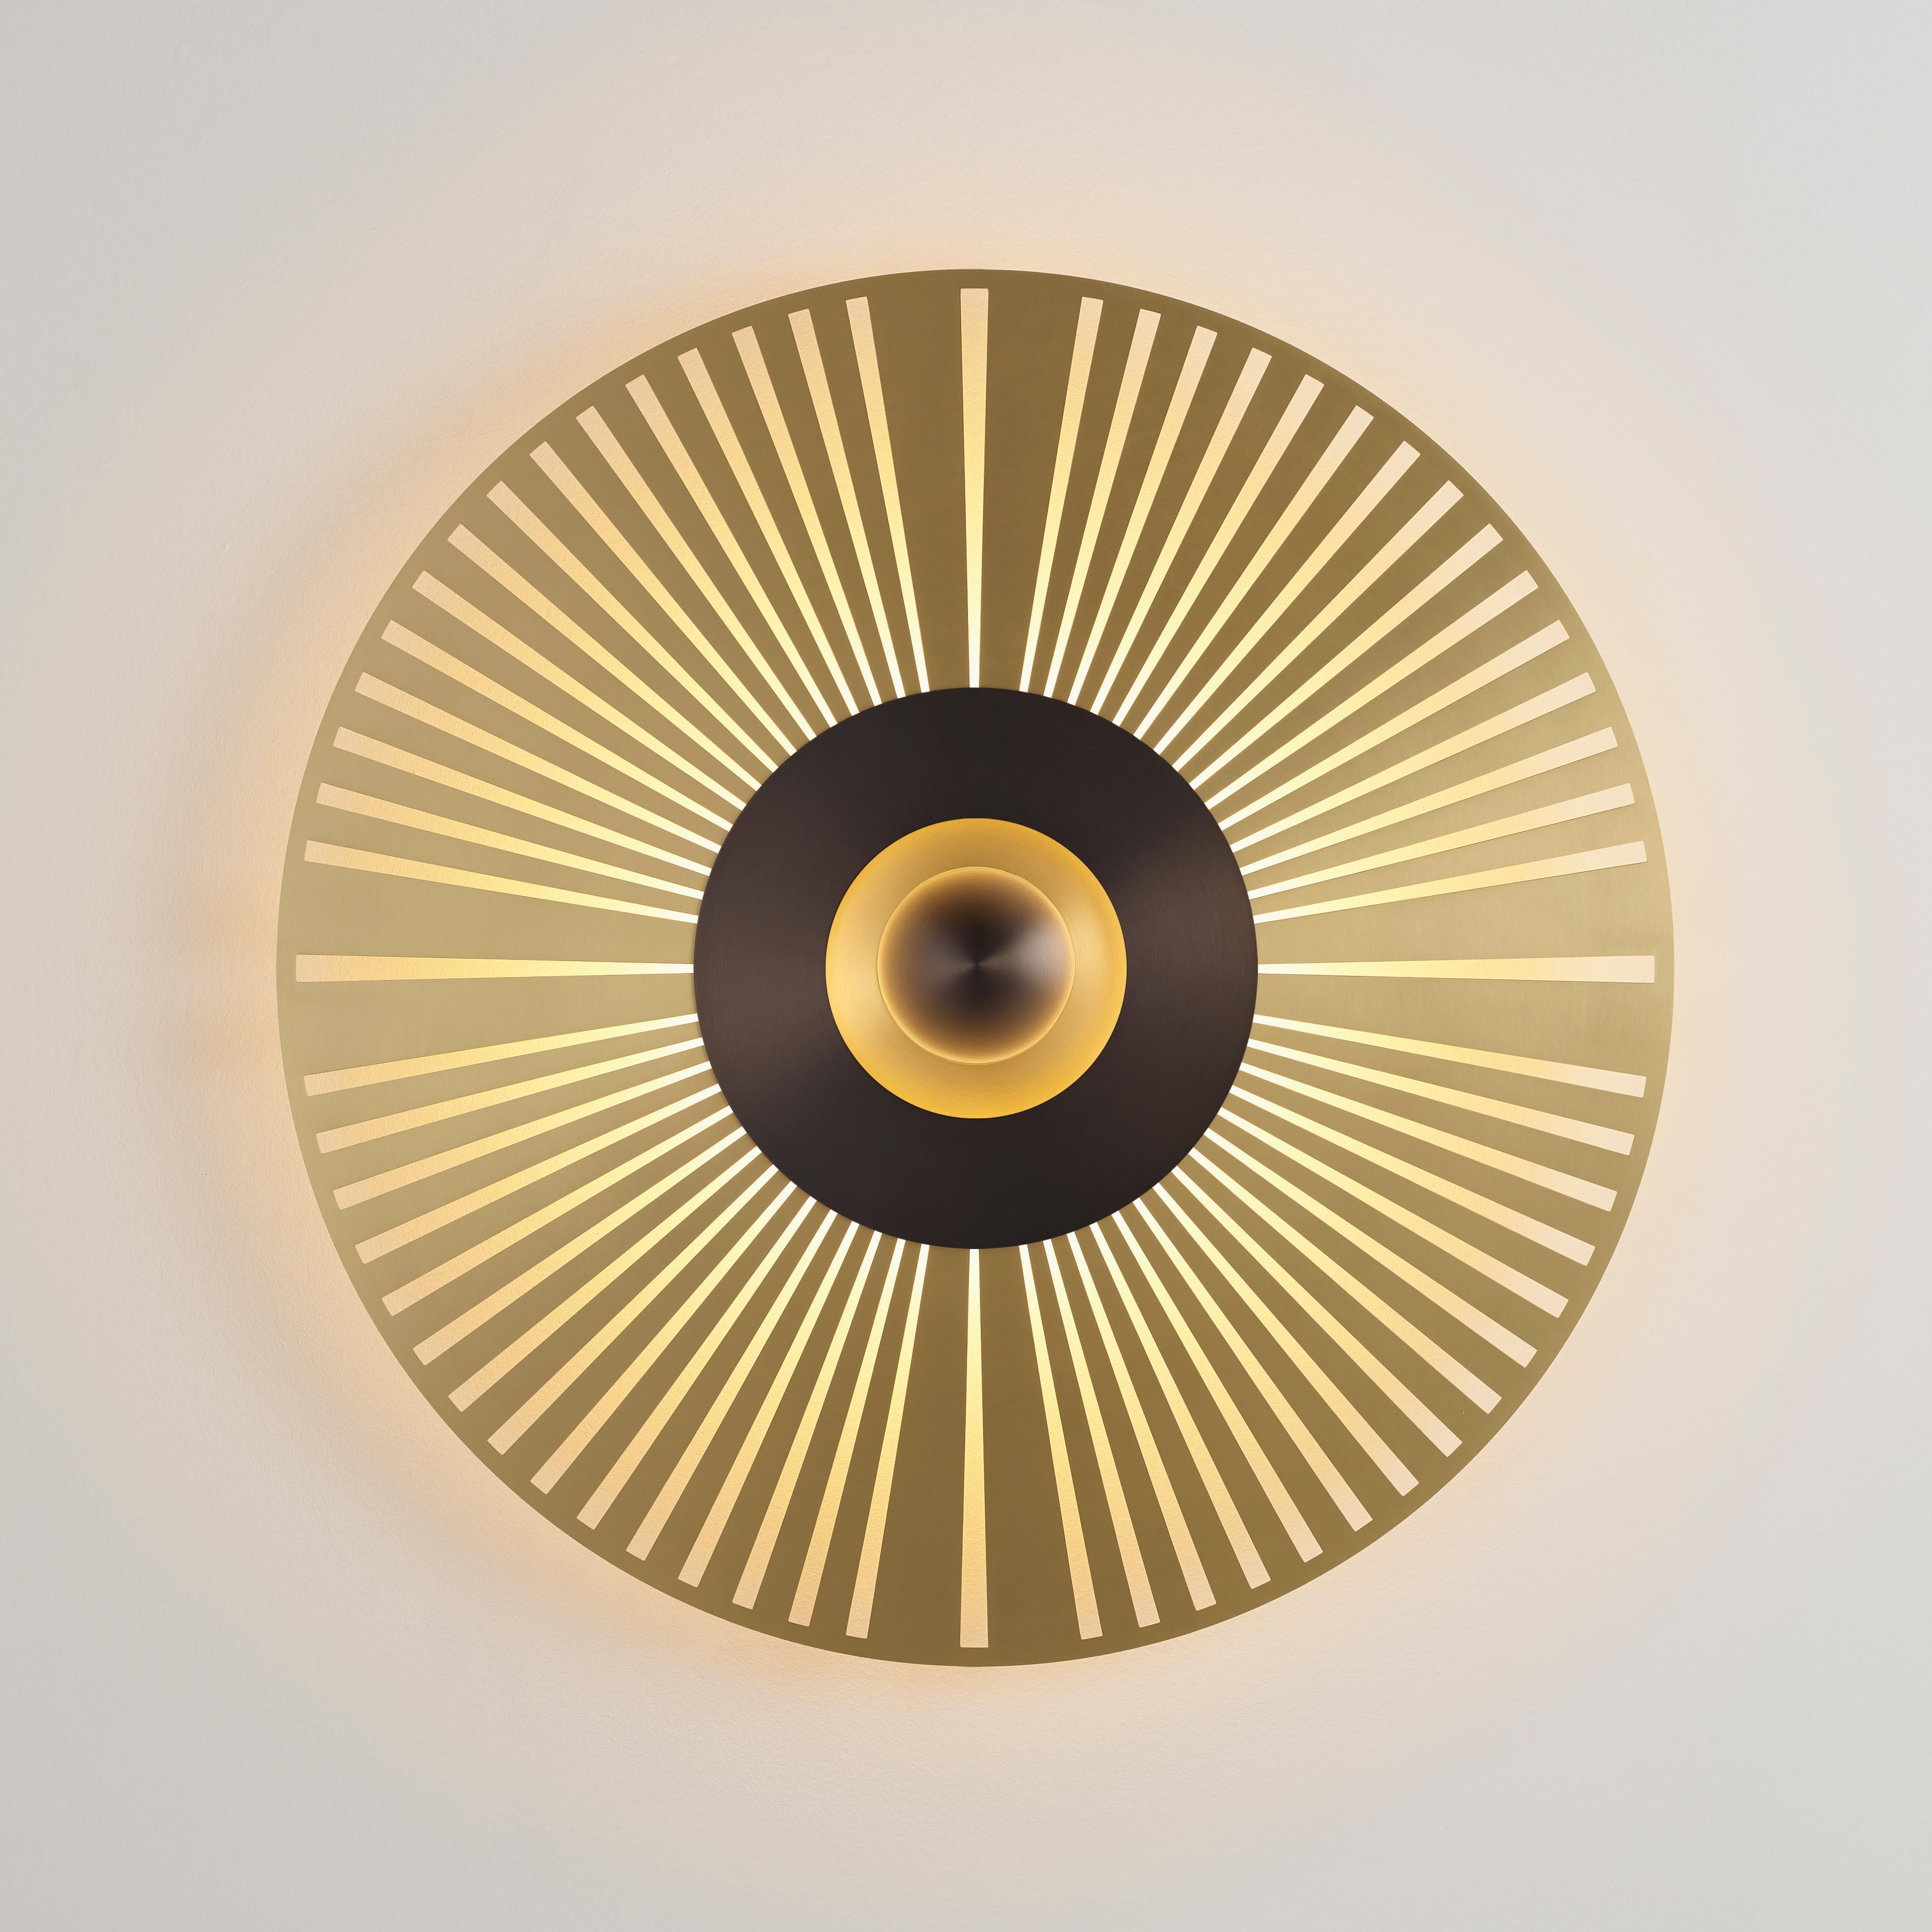 Atmos Eclat wall light by Emilie Cathelineau
Dimensions: D80 cm
Materials: Solid brass, Polycarbonate diffuser.
Others finishes and dimensions are available.

All our lamps can be wired according to each country. If sold to the USA it will be